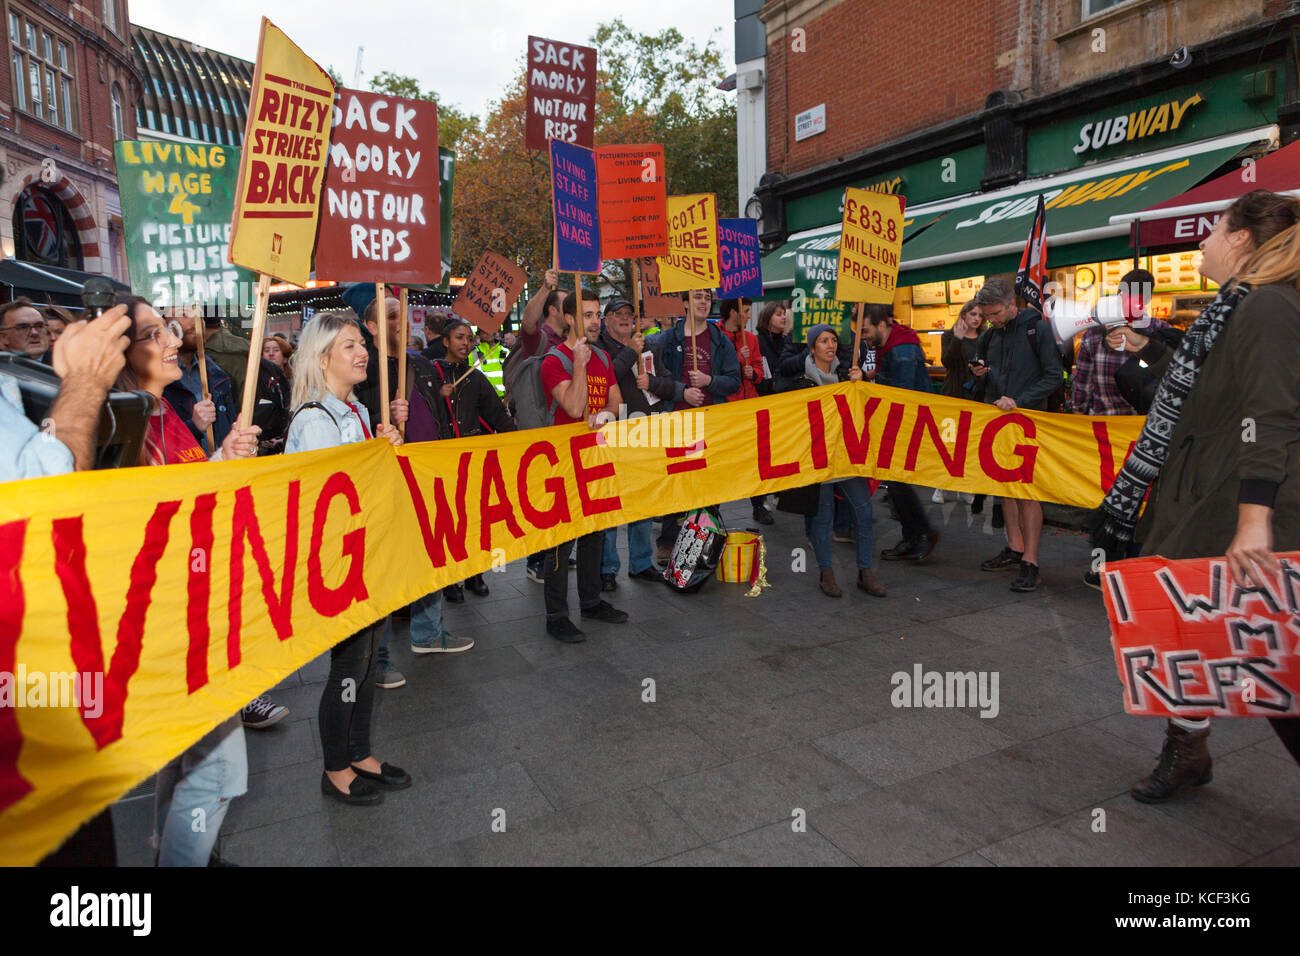 London, UK. 4th Oct, 2017. Striking Cineworld workers hold 'Living Wage' protest at BFI London Film Festival, Leicester Square, London UK. Credit: Steve Parkins/Alamy Live News Stock Photo